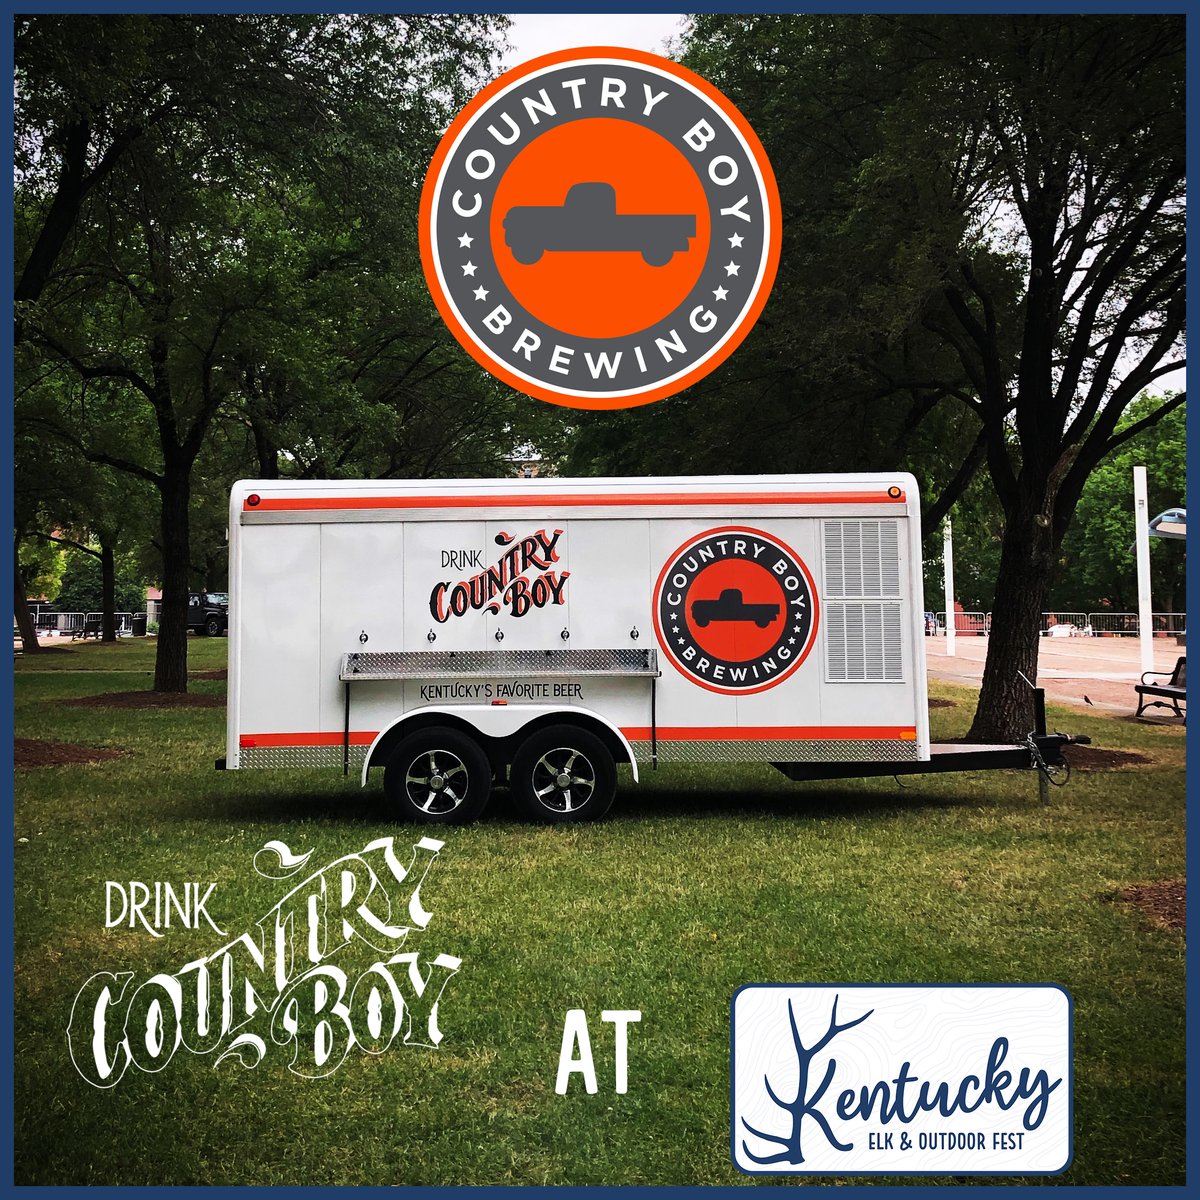 Look who will be serving up ICE COLD BEER at the Elk Fest!
@CountryBoyBrew #forthecountry #kycraftbeer #independentbeer #cbb #drinkcountryboy